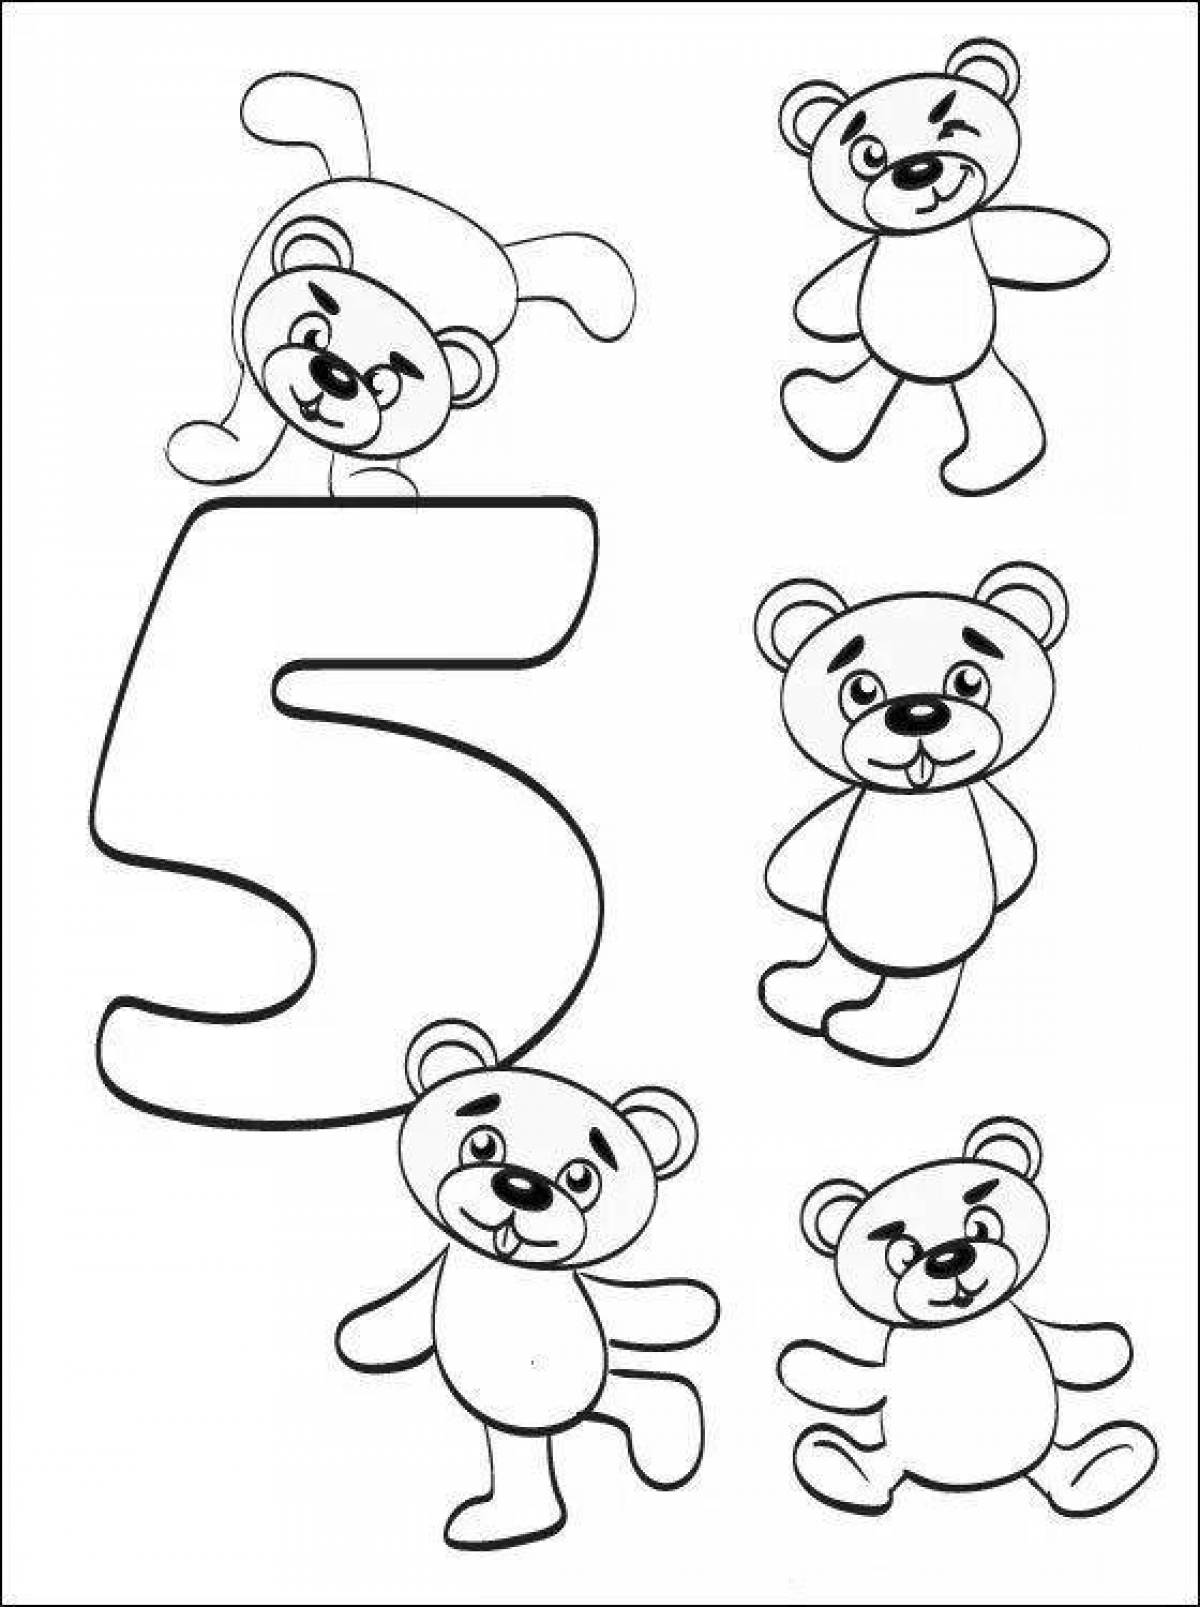 Colorful number 5 coloring book for kids